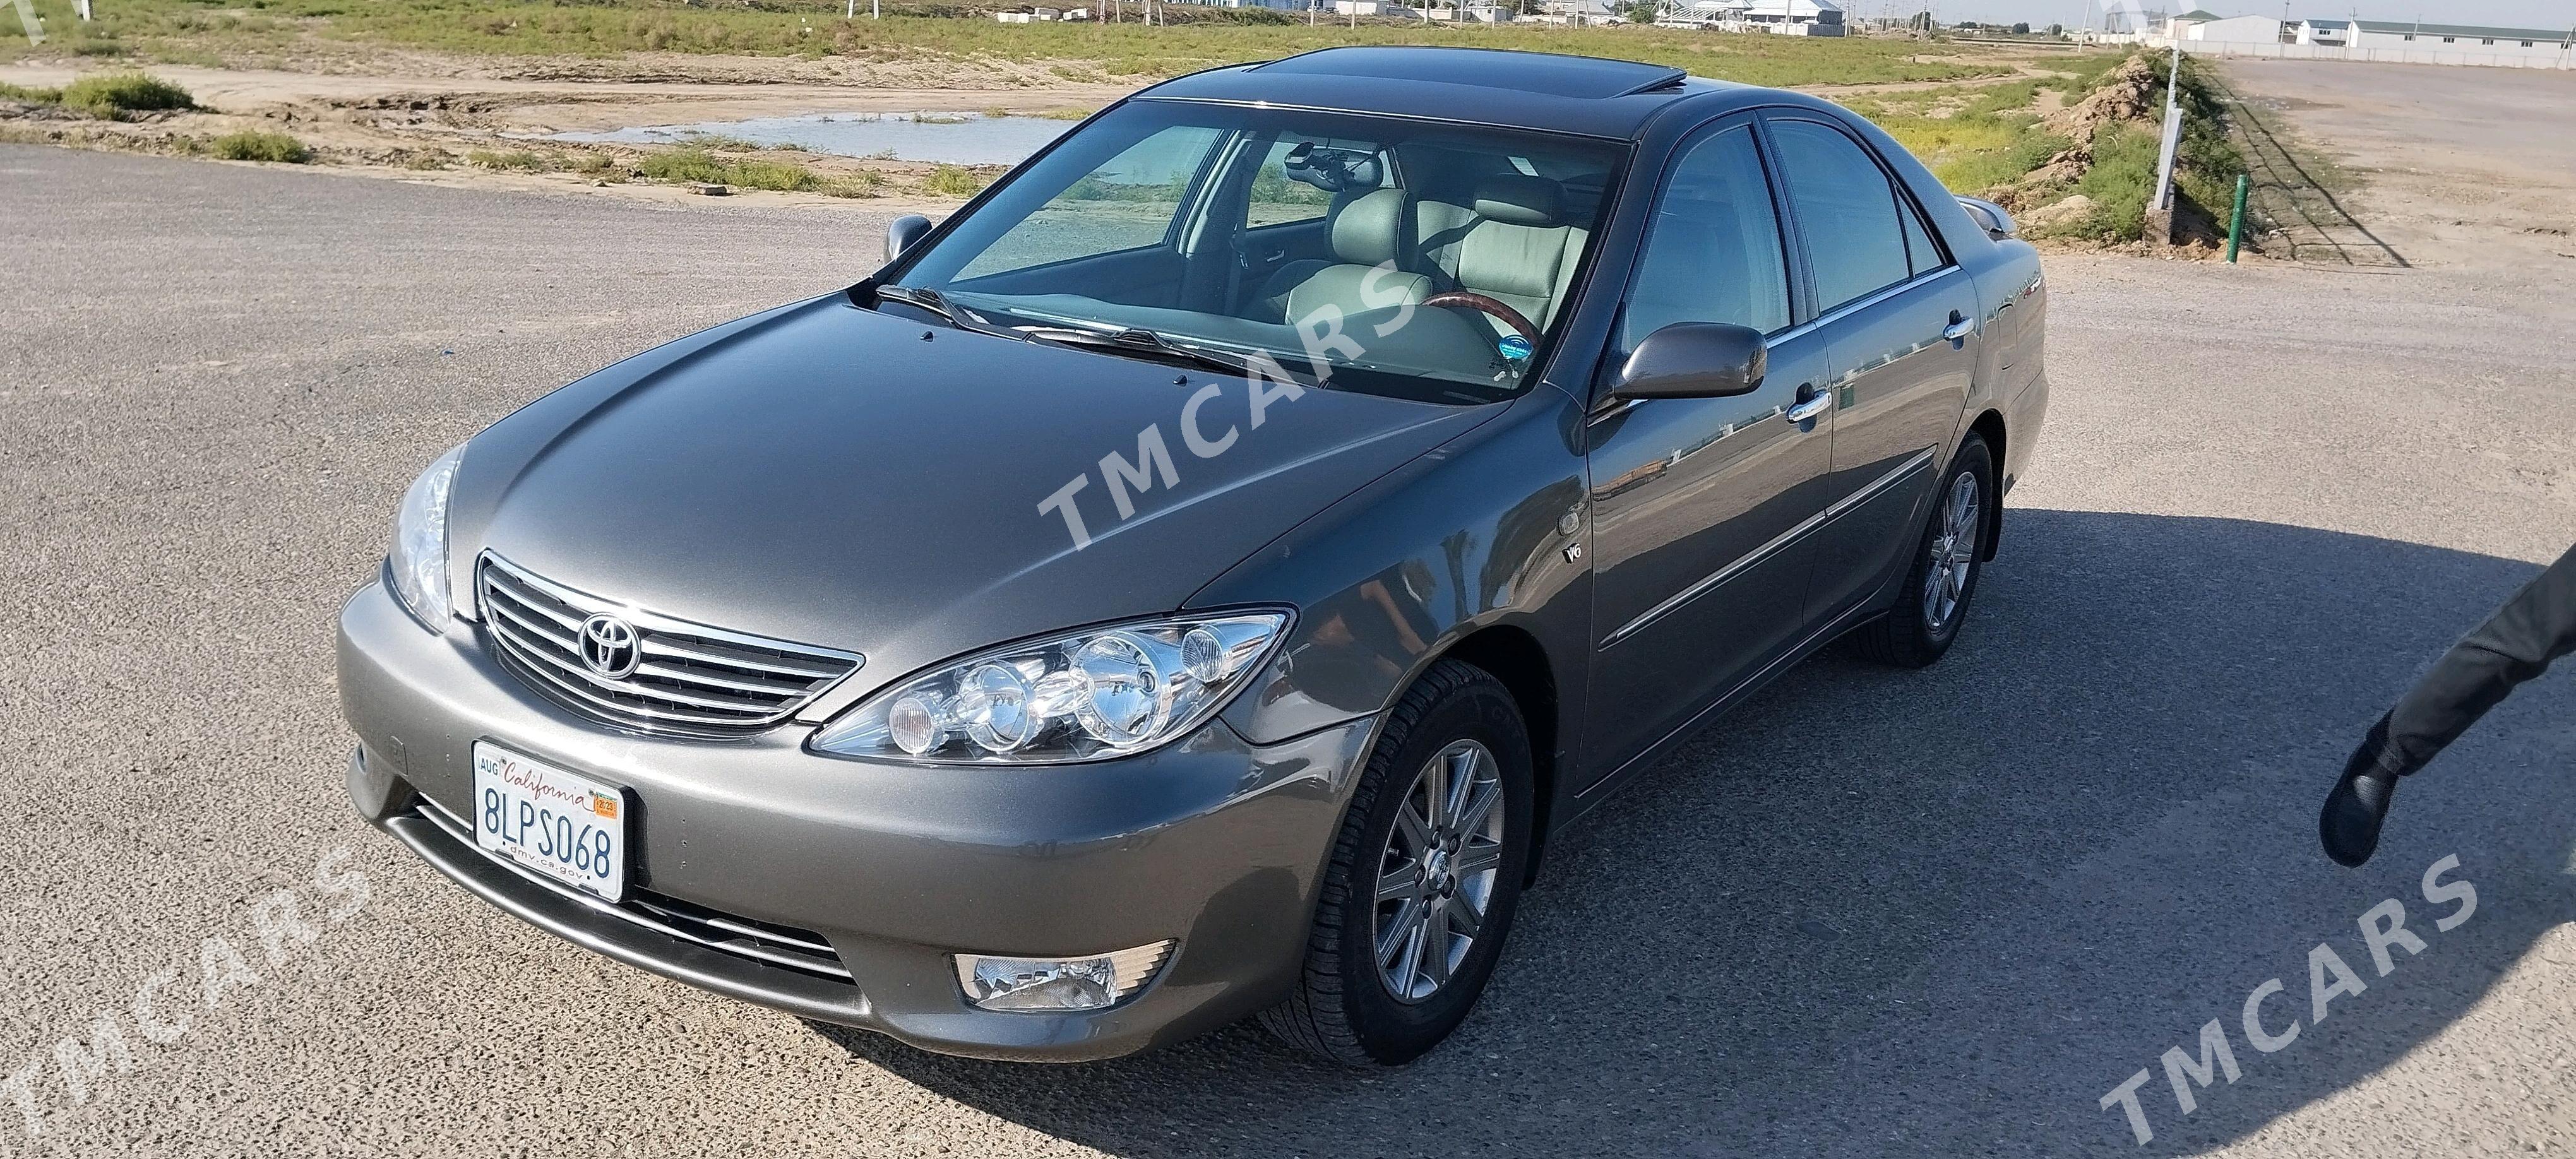 Toyota Camry 2004 - 165 000 TMT - Mary - img 2